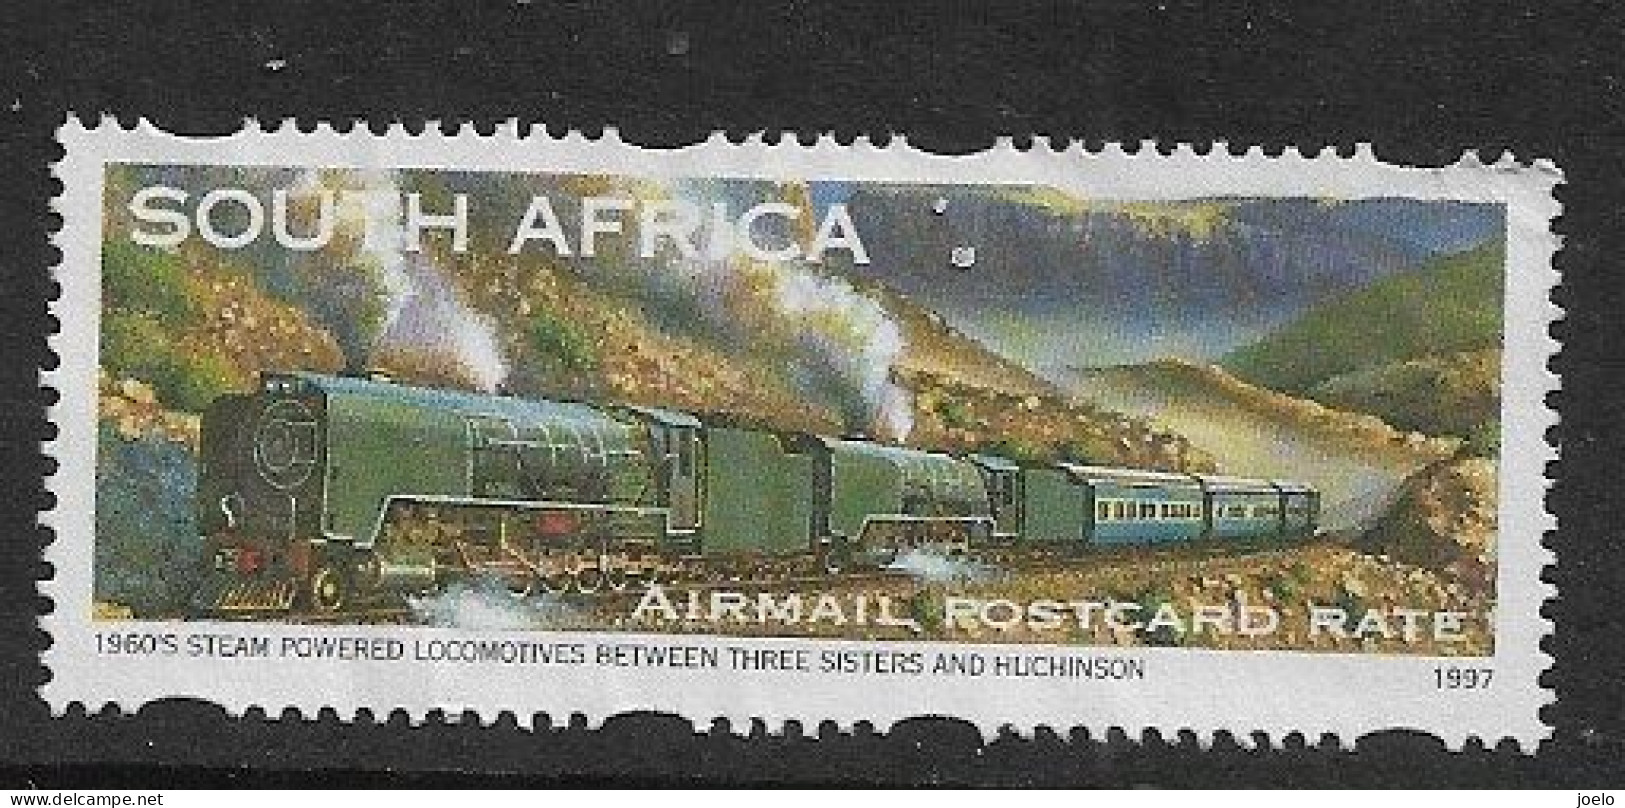 SOUTH AFRICA 1997 STEAM POWERED LOCOMOTIVE BLUE TRAIN - Used Stamps